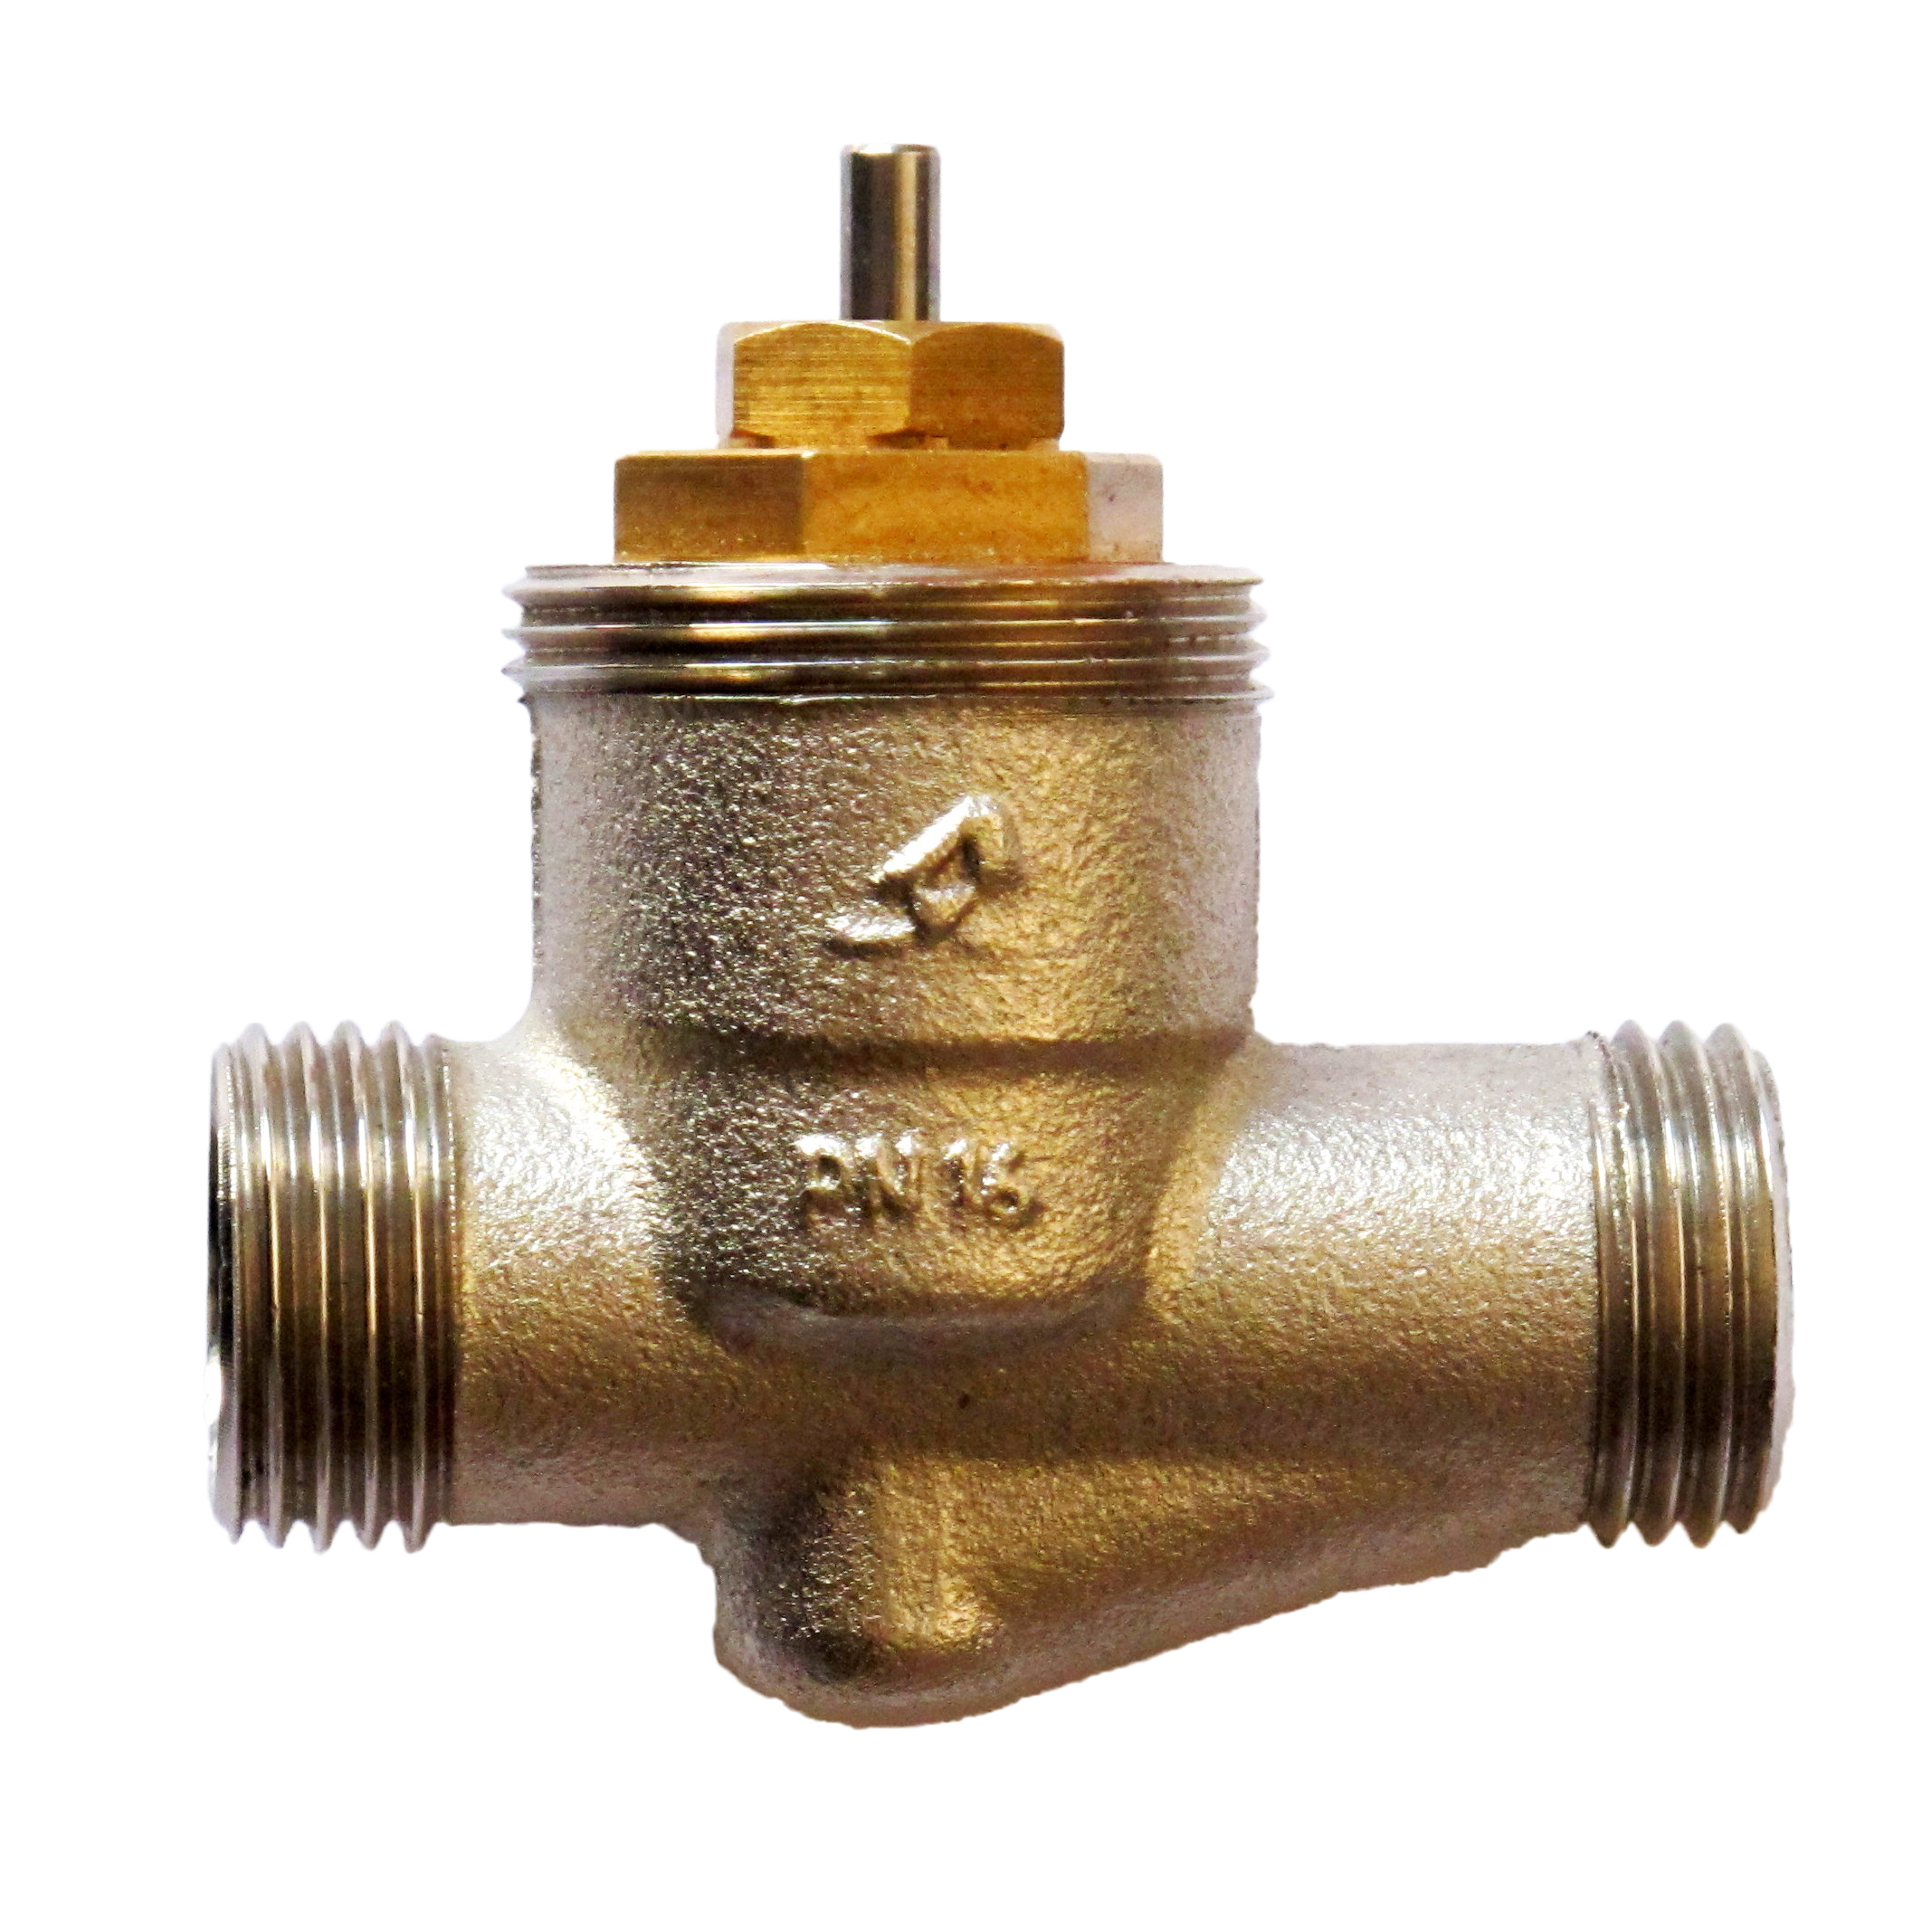 Two-way valves